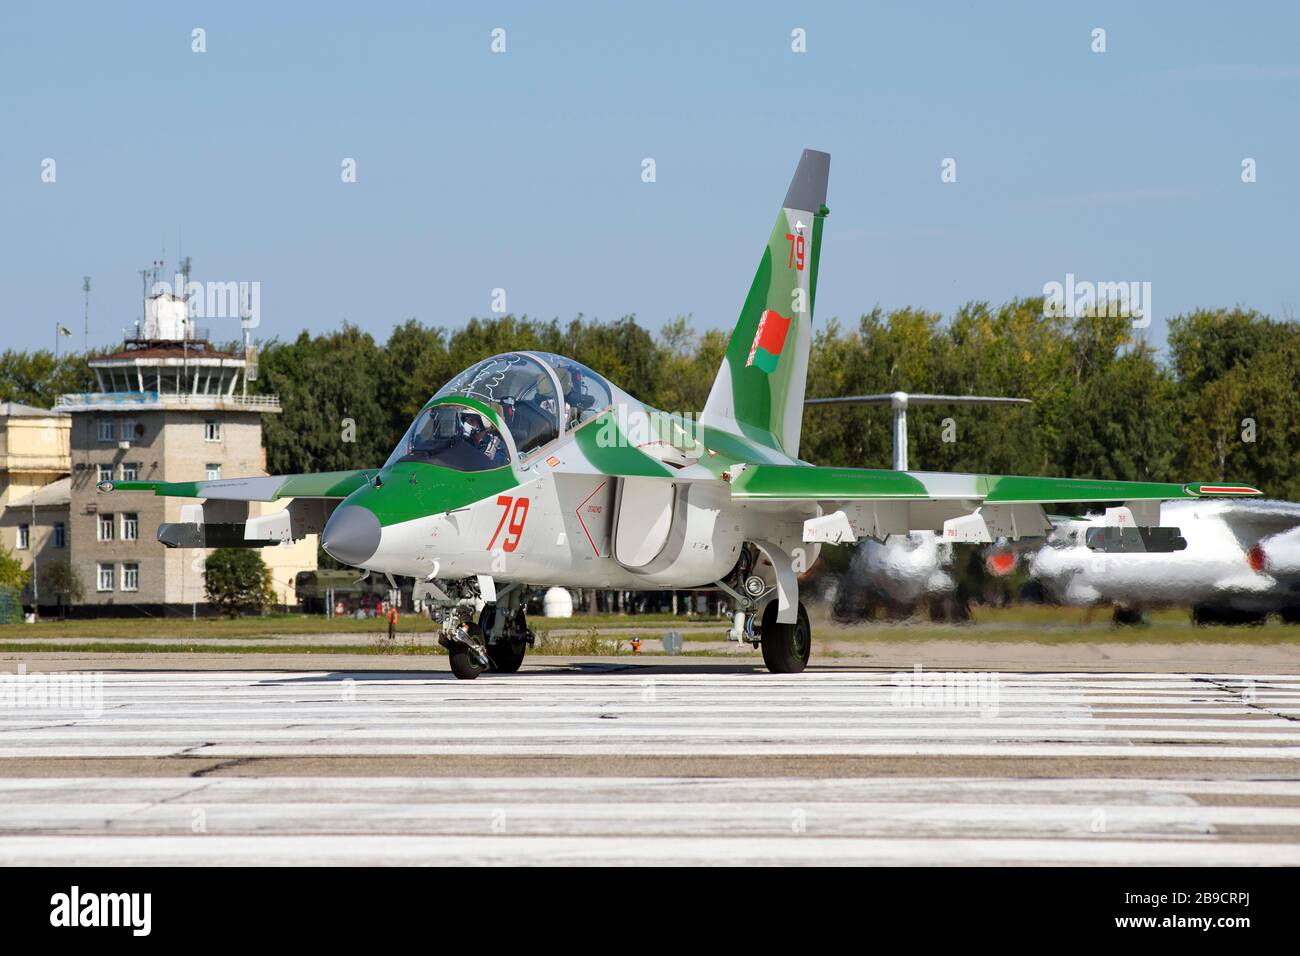 Belarusian Air Force Yak-130 advanced trainer and light attack aircraft. Stock Photo